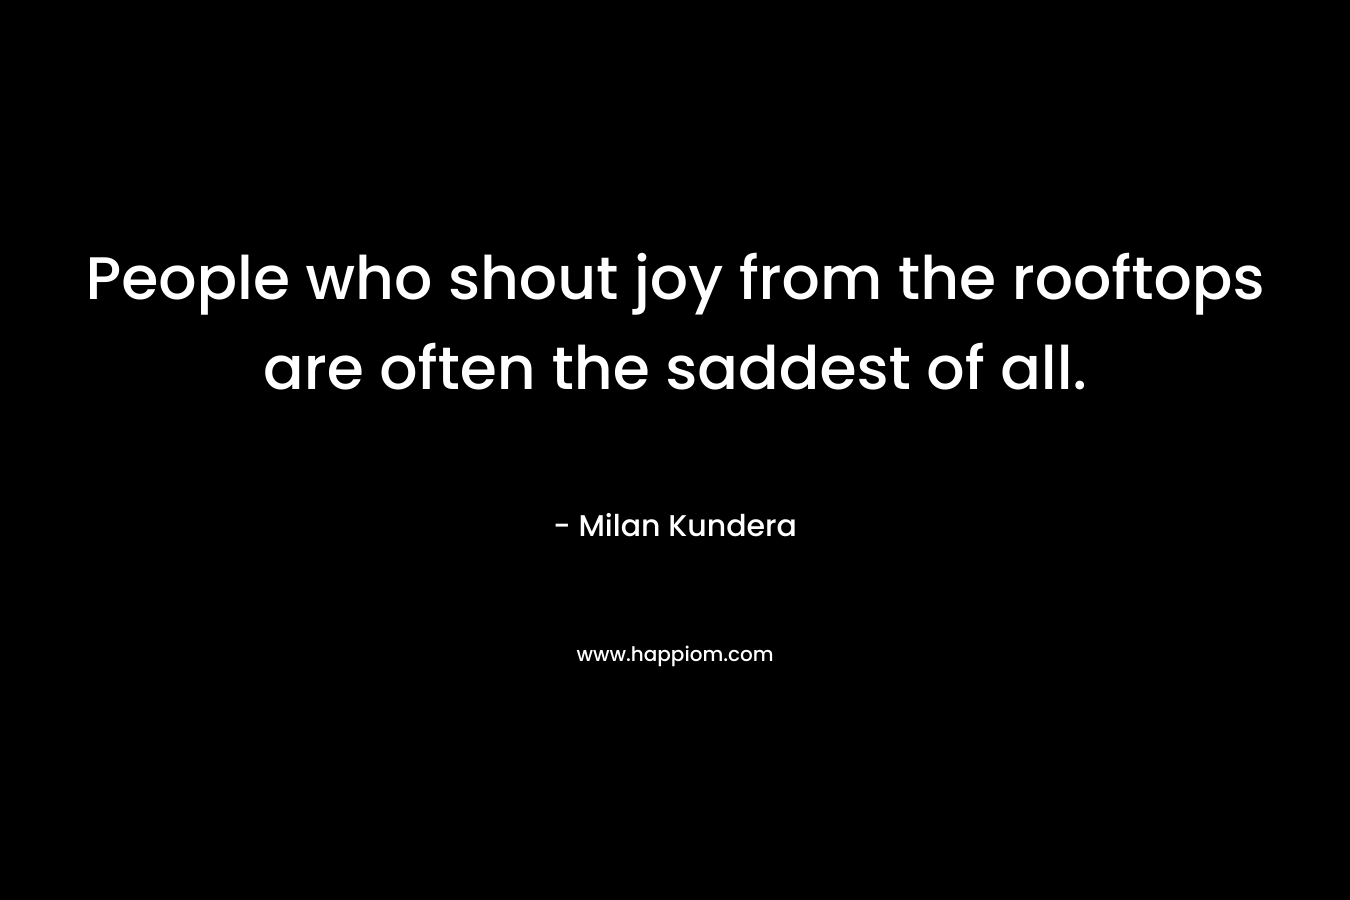 People who shout joy from the rooftops are often the saddest of all.